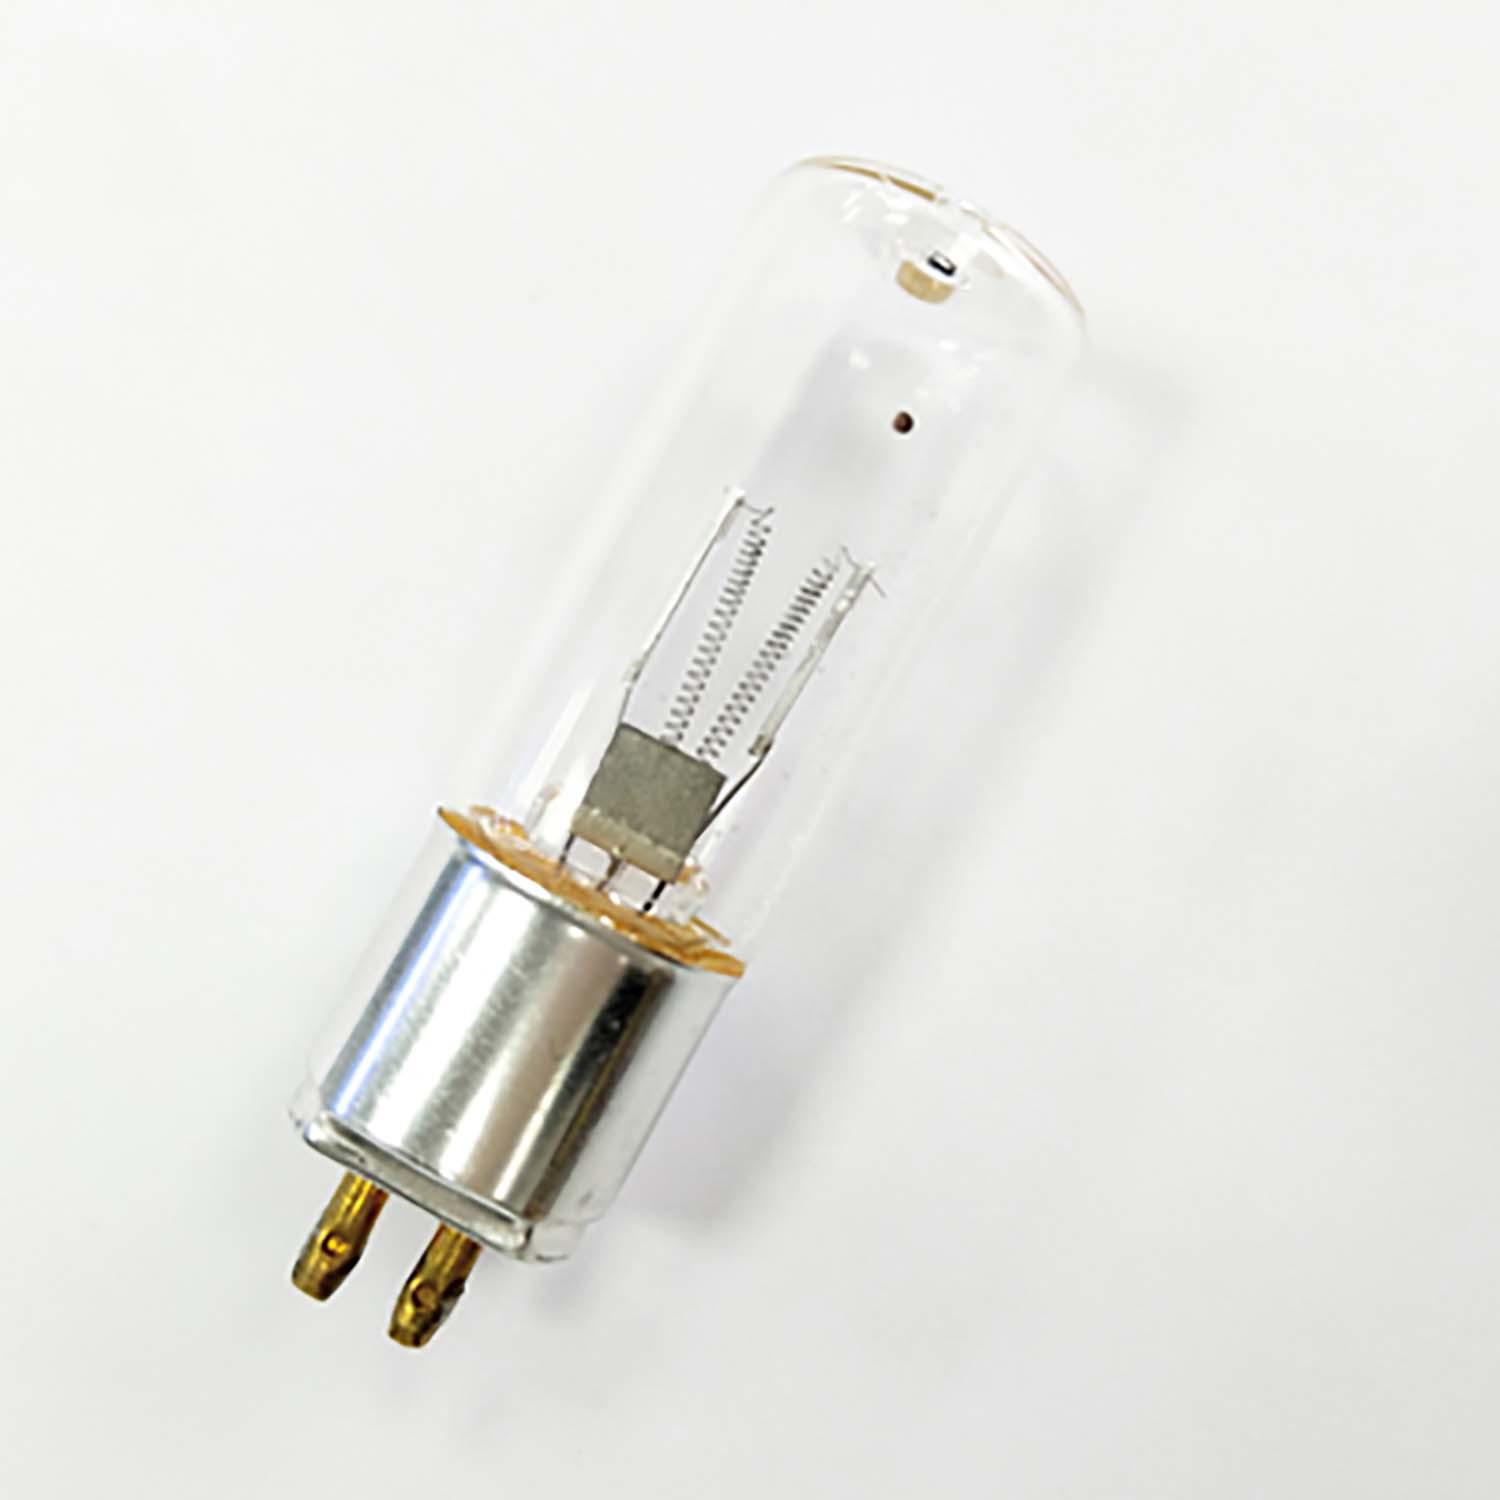 LiangYueLiang ultraviolet uvc germicidal lamp chinese manufacturer for air sterilization